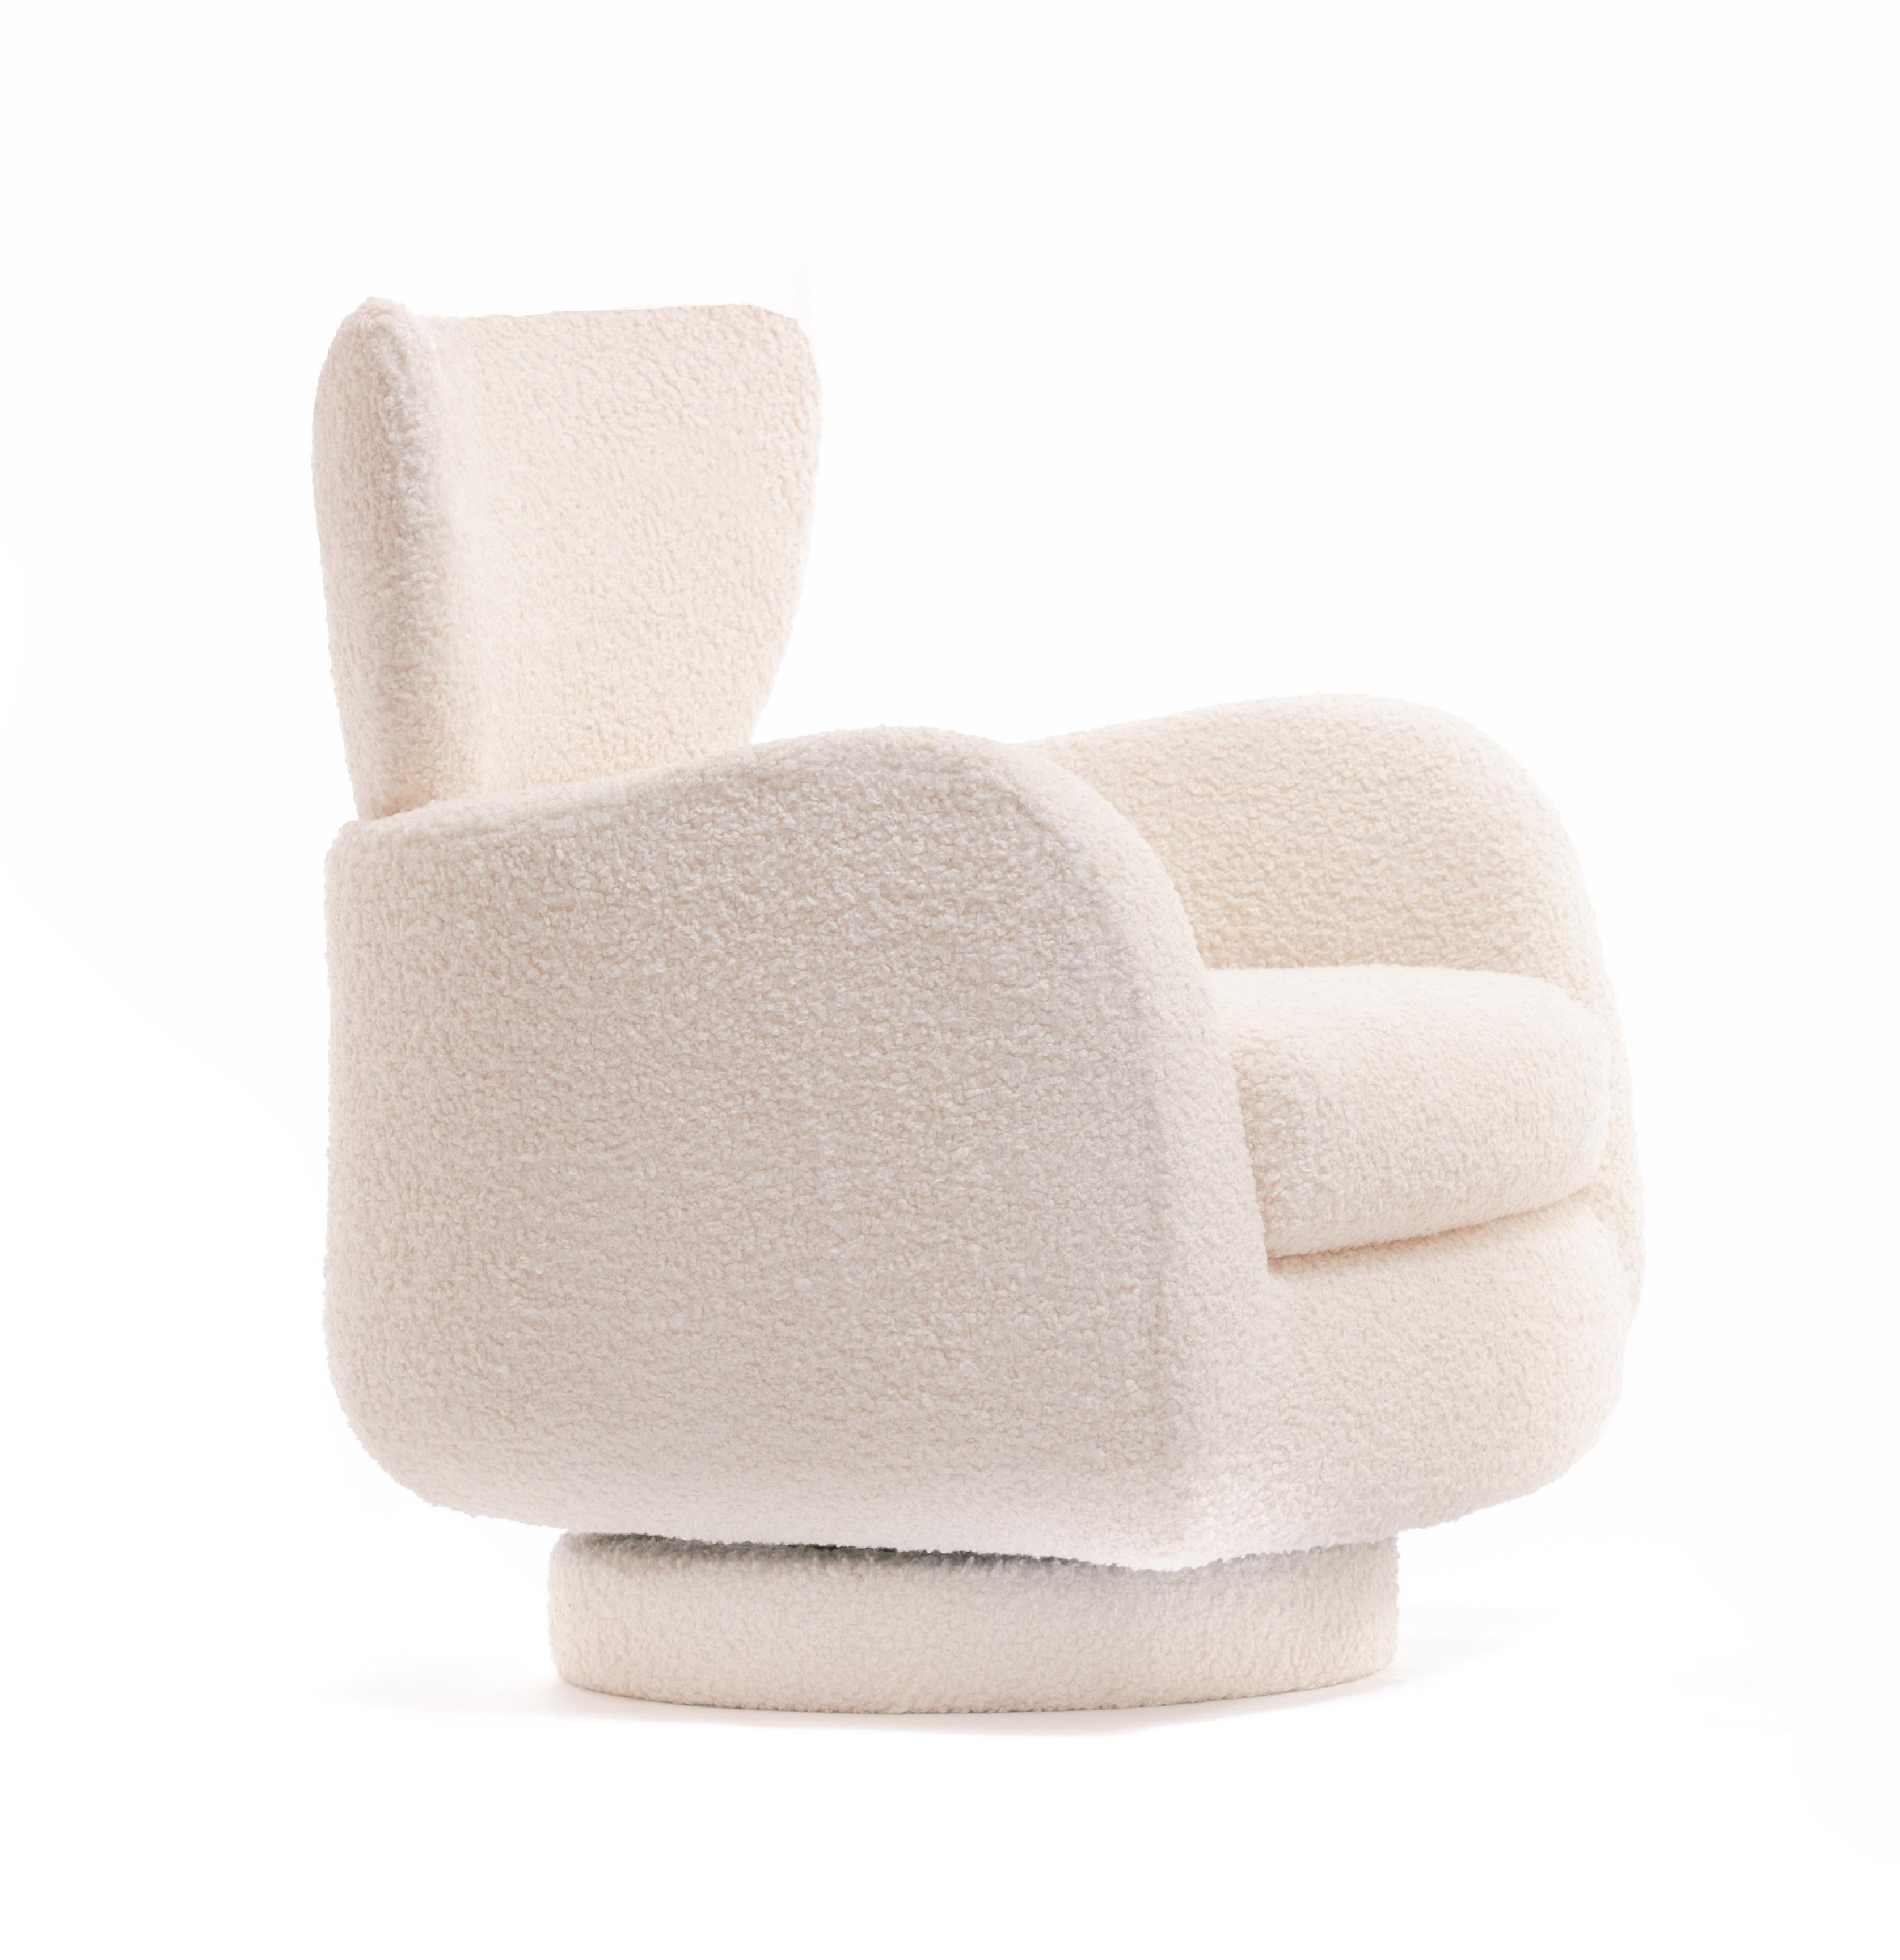 Vintage Vladimir Kagan wingback tilt and swivel lounge chair - newly and freshly reupholstered in ivory bouclé fabric - for Directional. Sculptural and Classic Kagan design, this chair is surprisingly comfortable. The seat back wraps around your